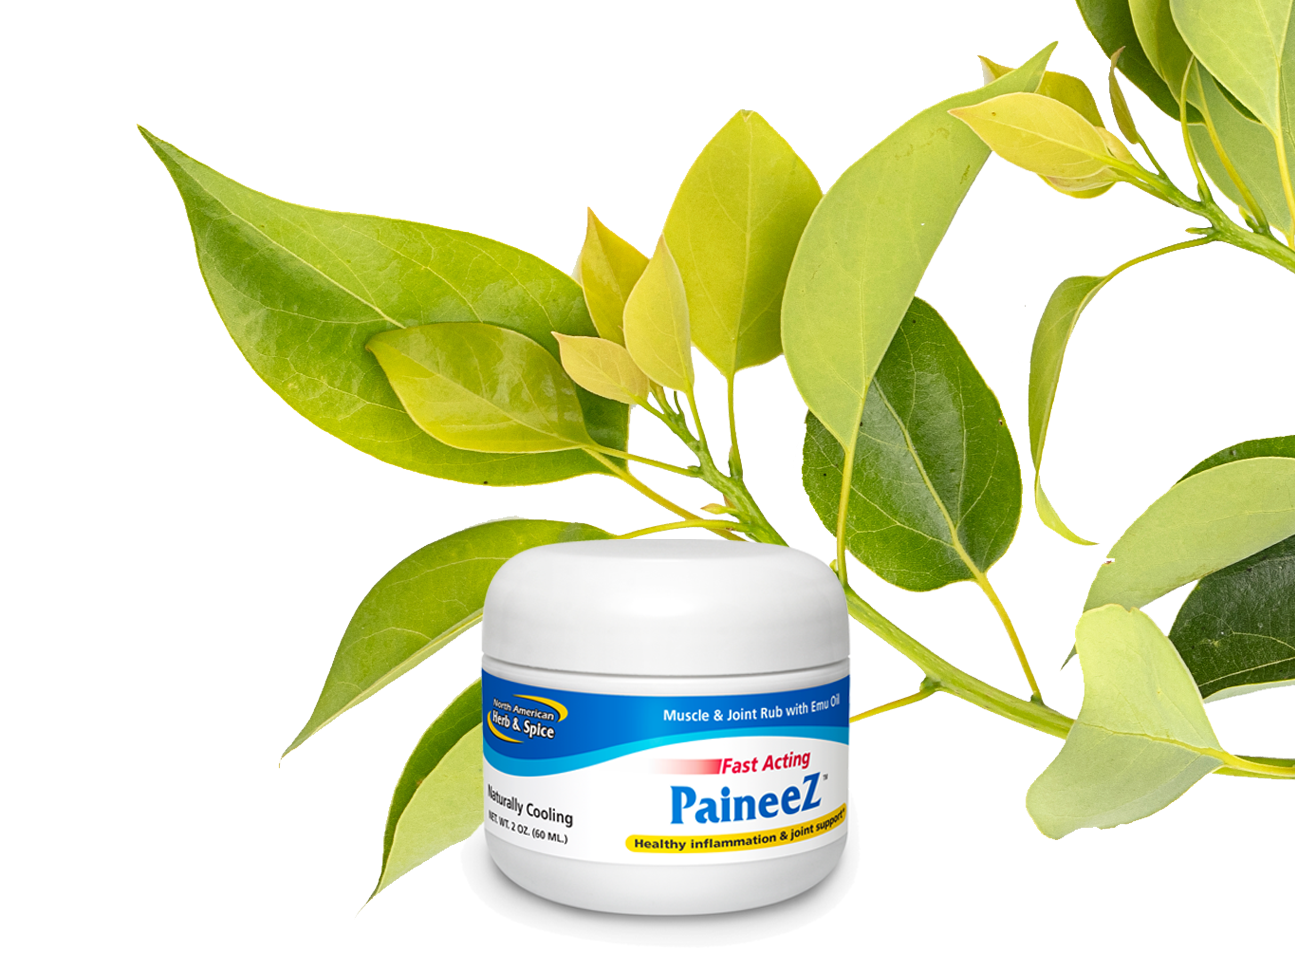 Camphor ingredient with Paineez product